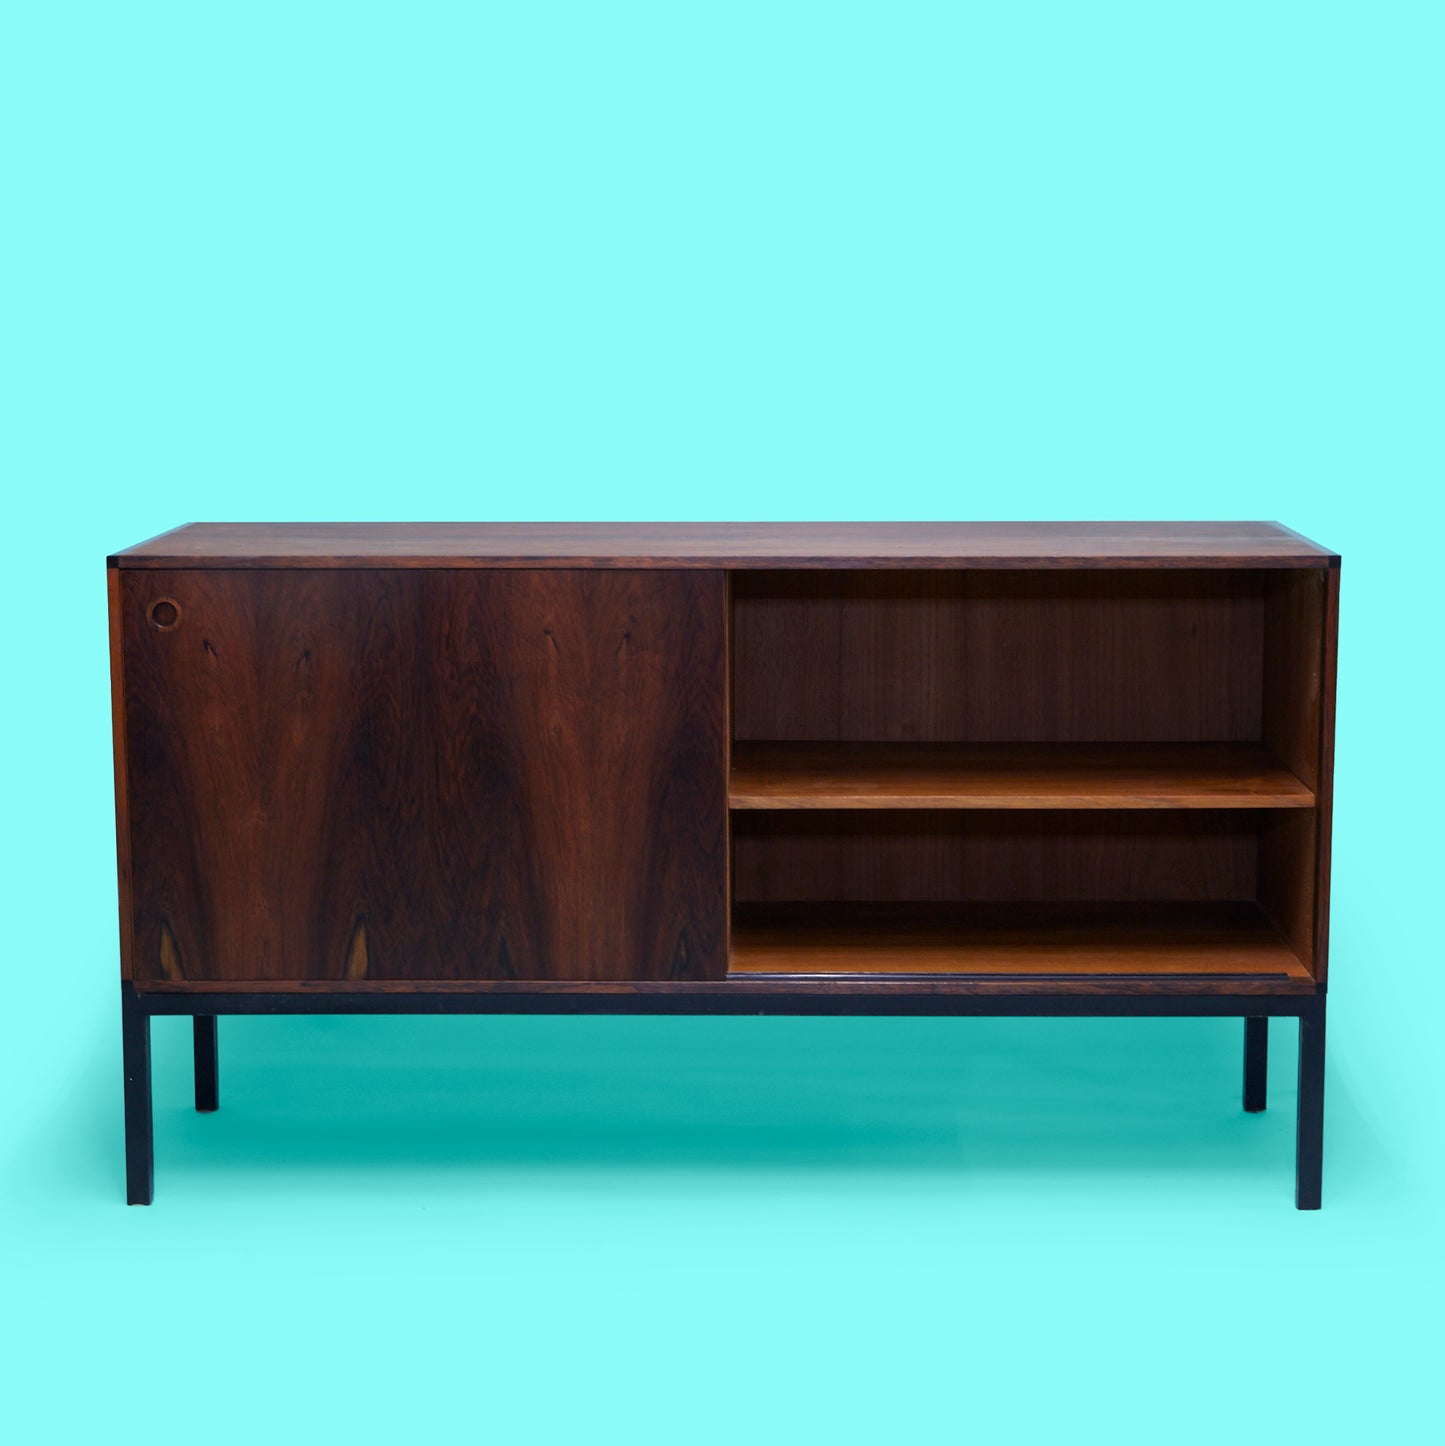 Midcentury Danish Modern Credenza or Cabinet in Rosewood with Black Legs